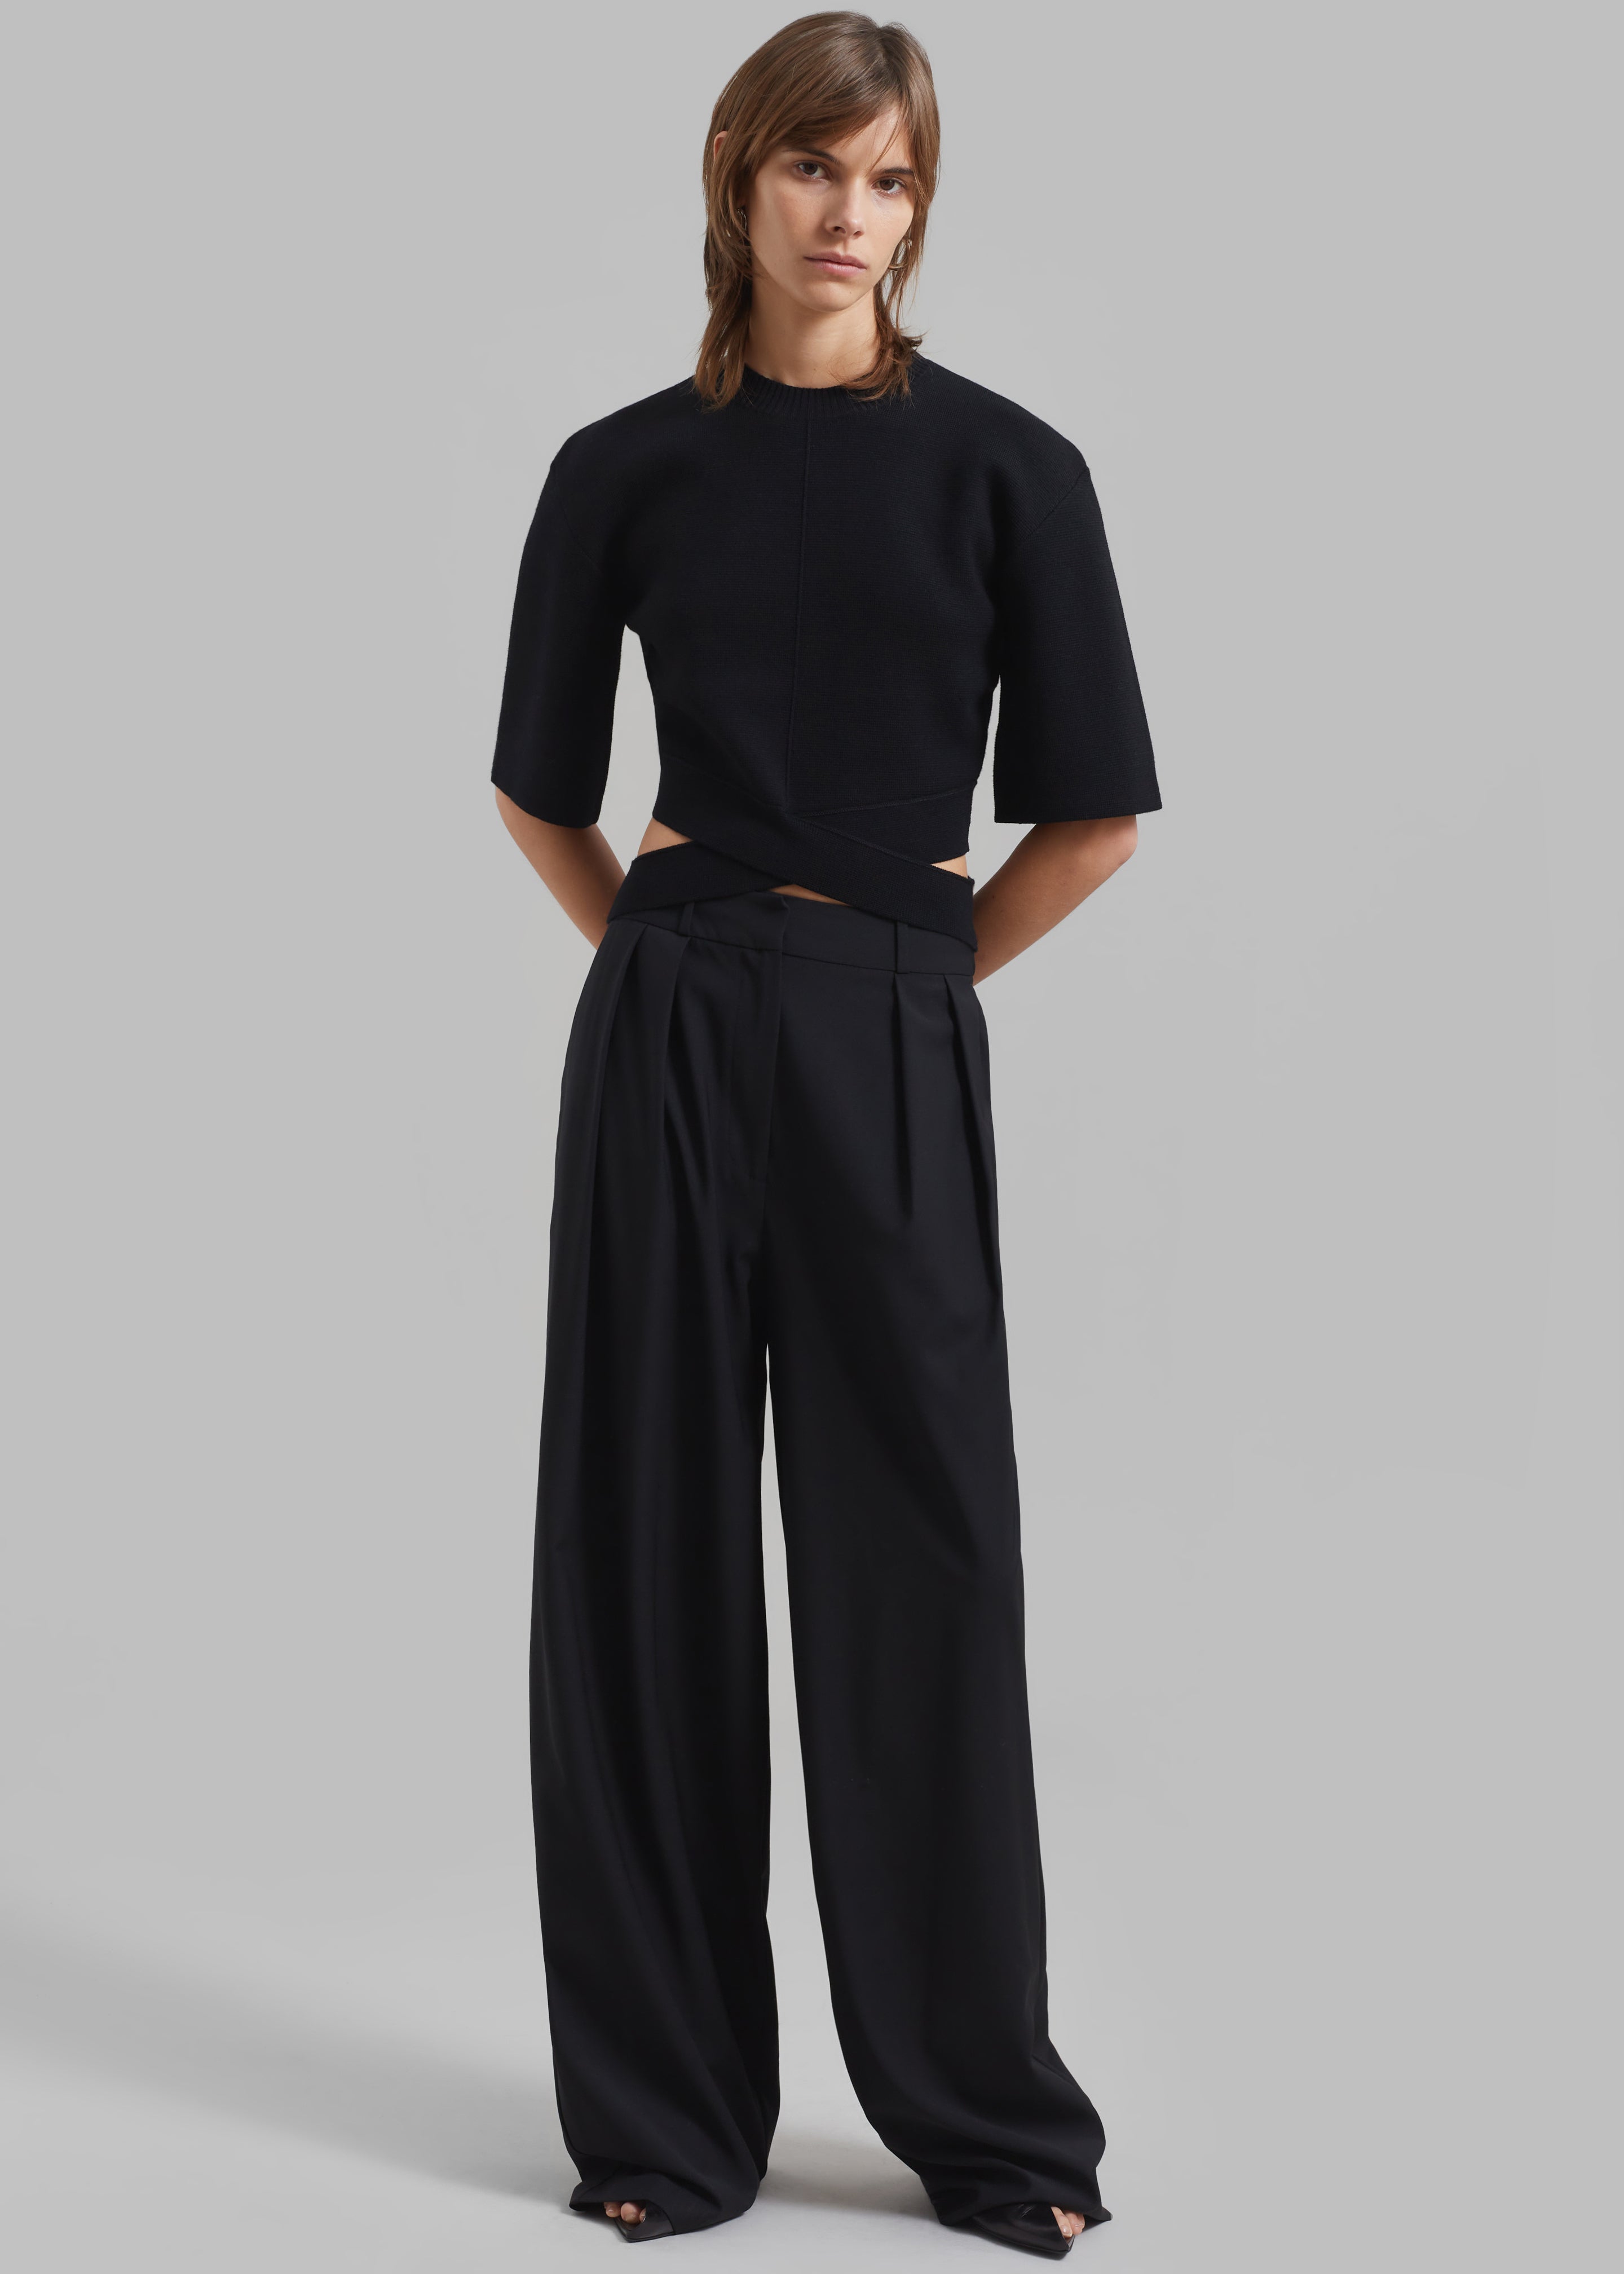 Ripley Pleated Trousers - Black - 6